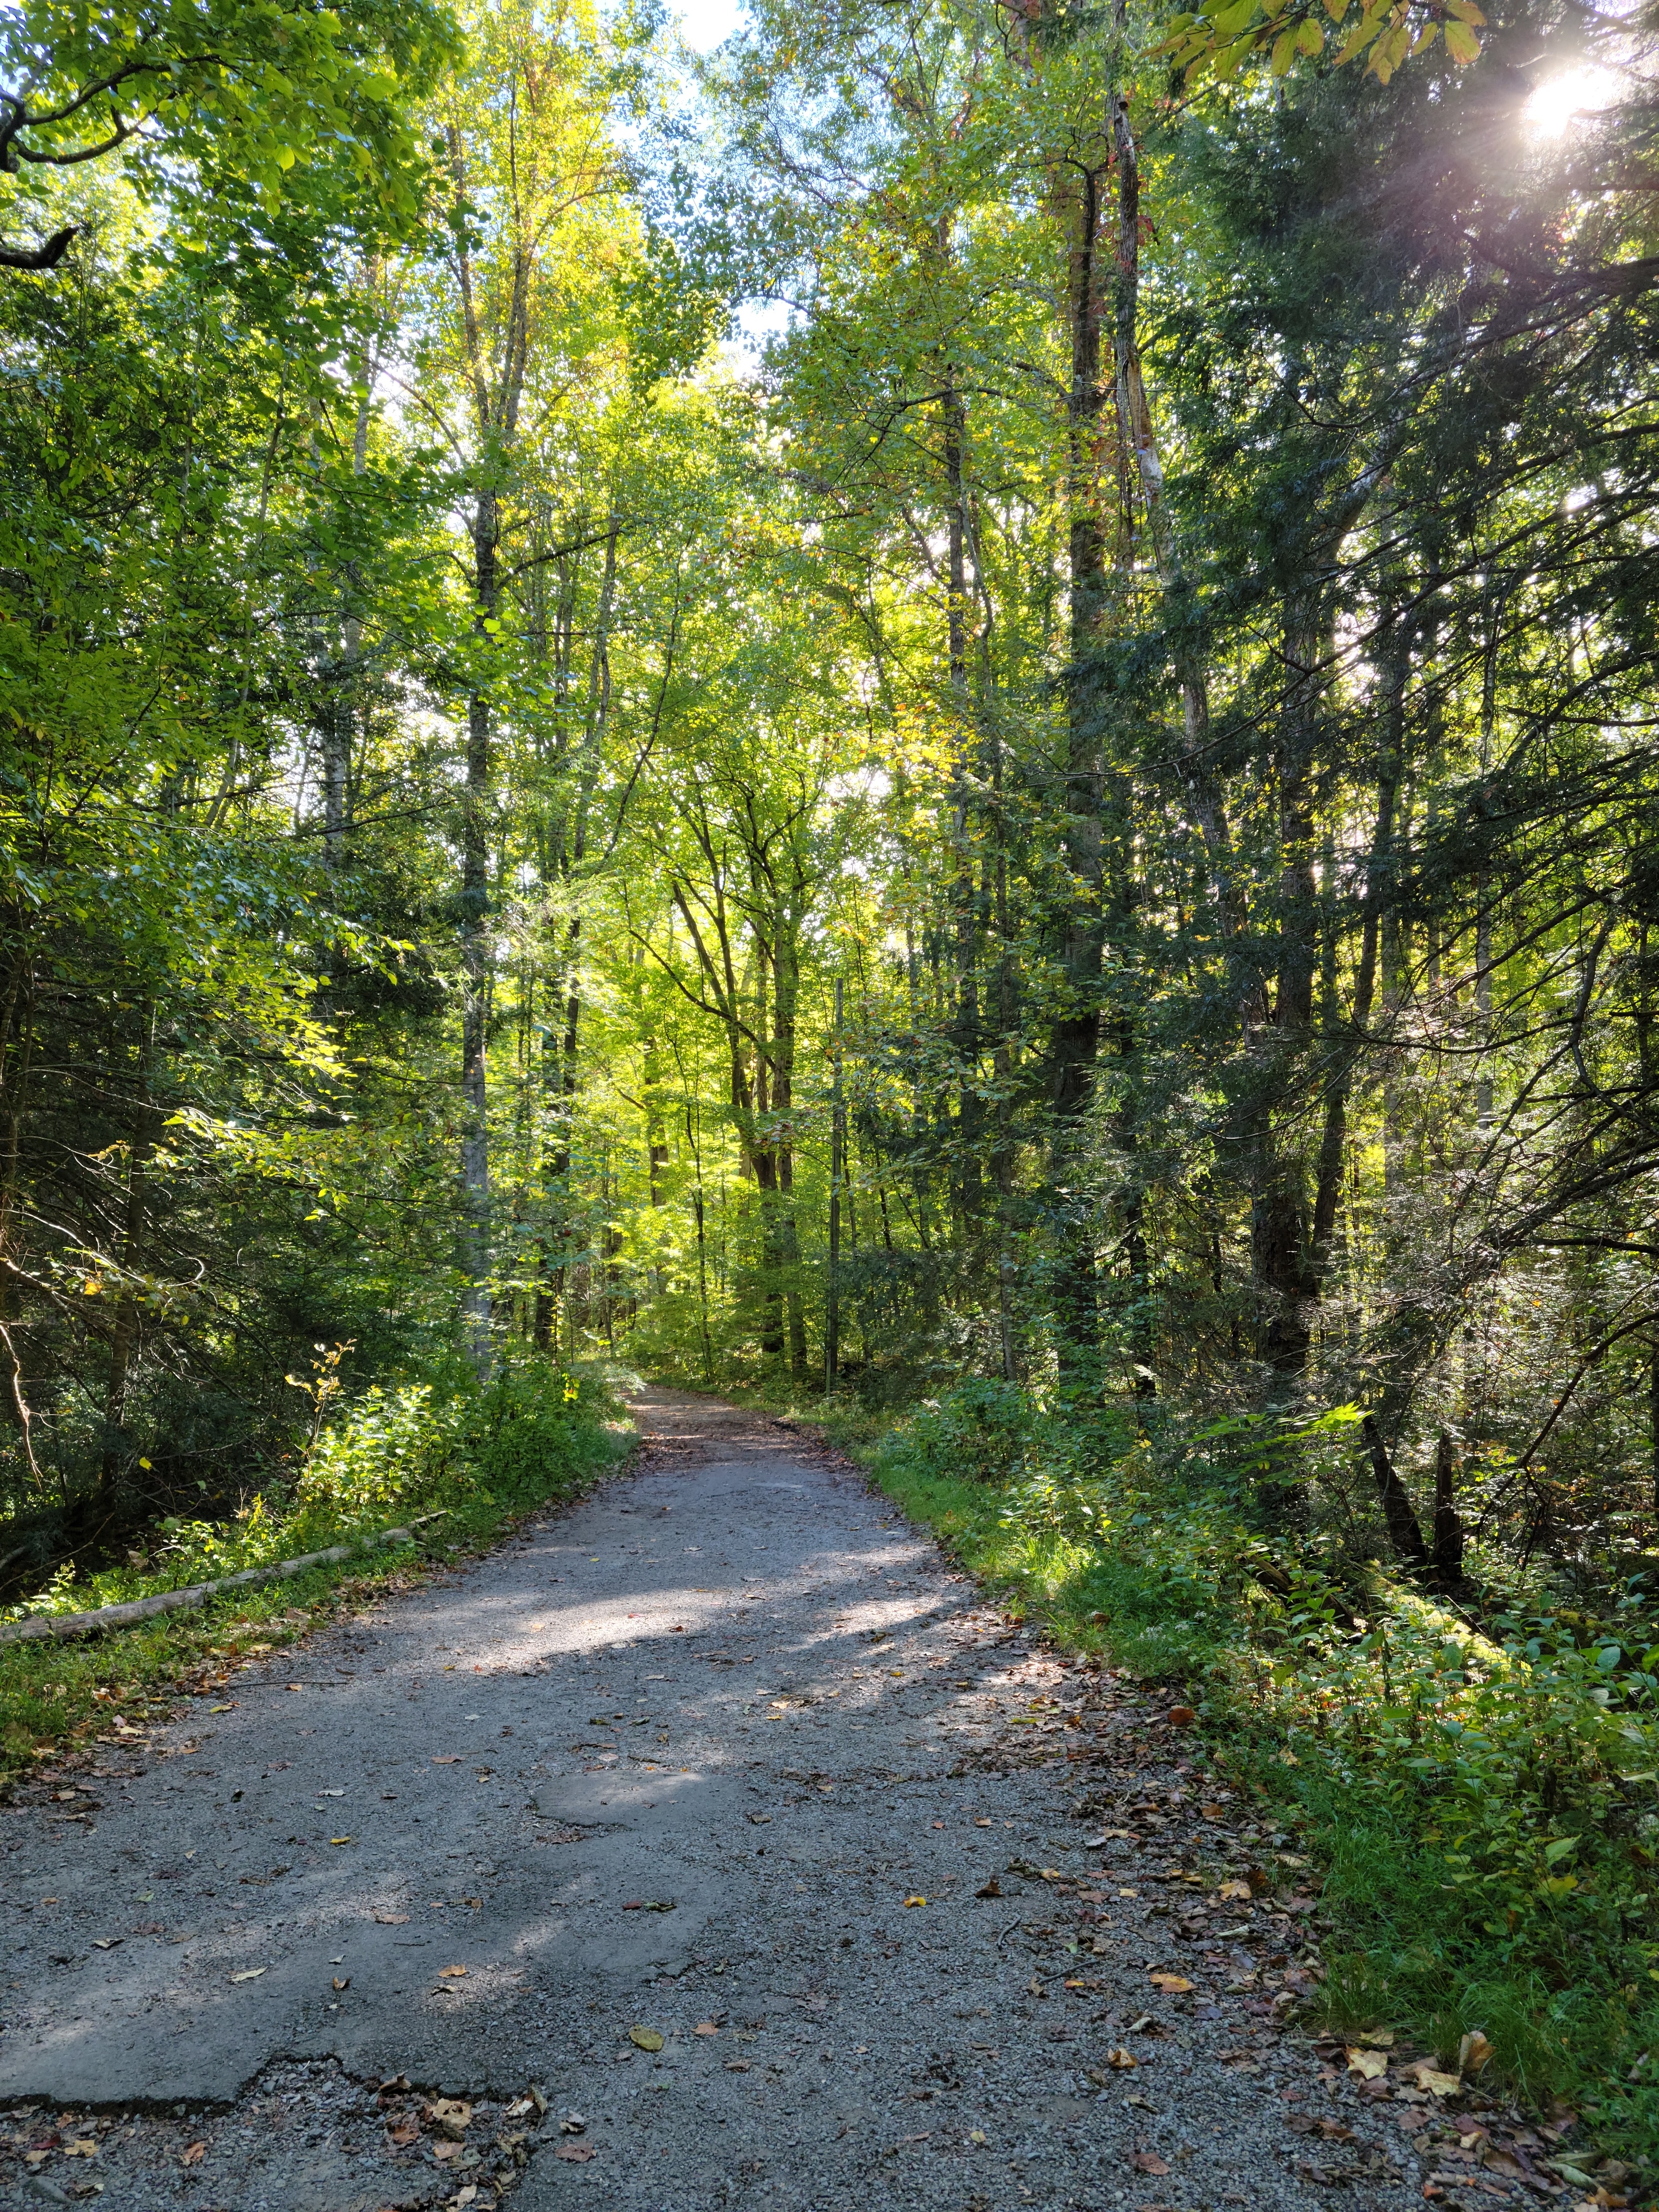 A wide trail through a forest with some cracked pavement.